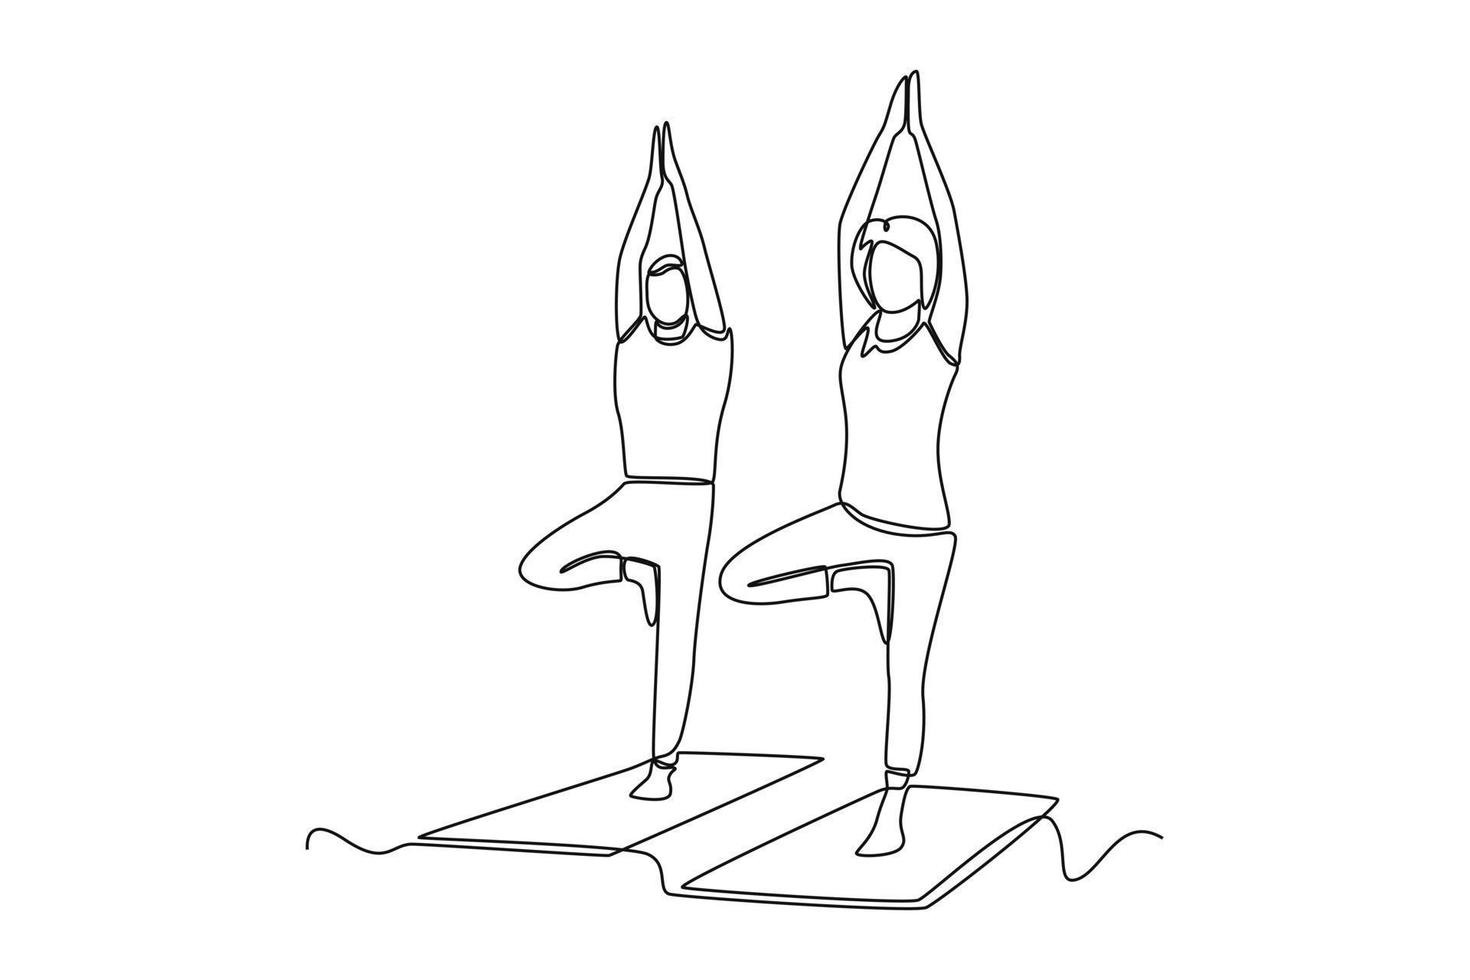 Continuous one line drawing yoga class session. Class in action concept. Single line draw design vector graphic illustration.